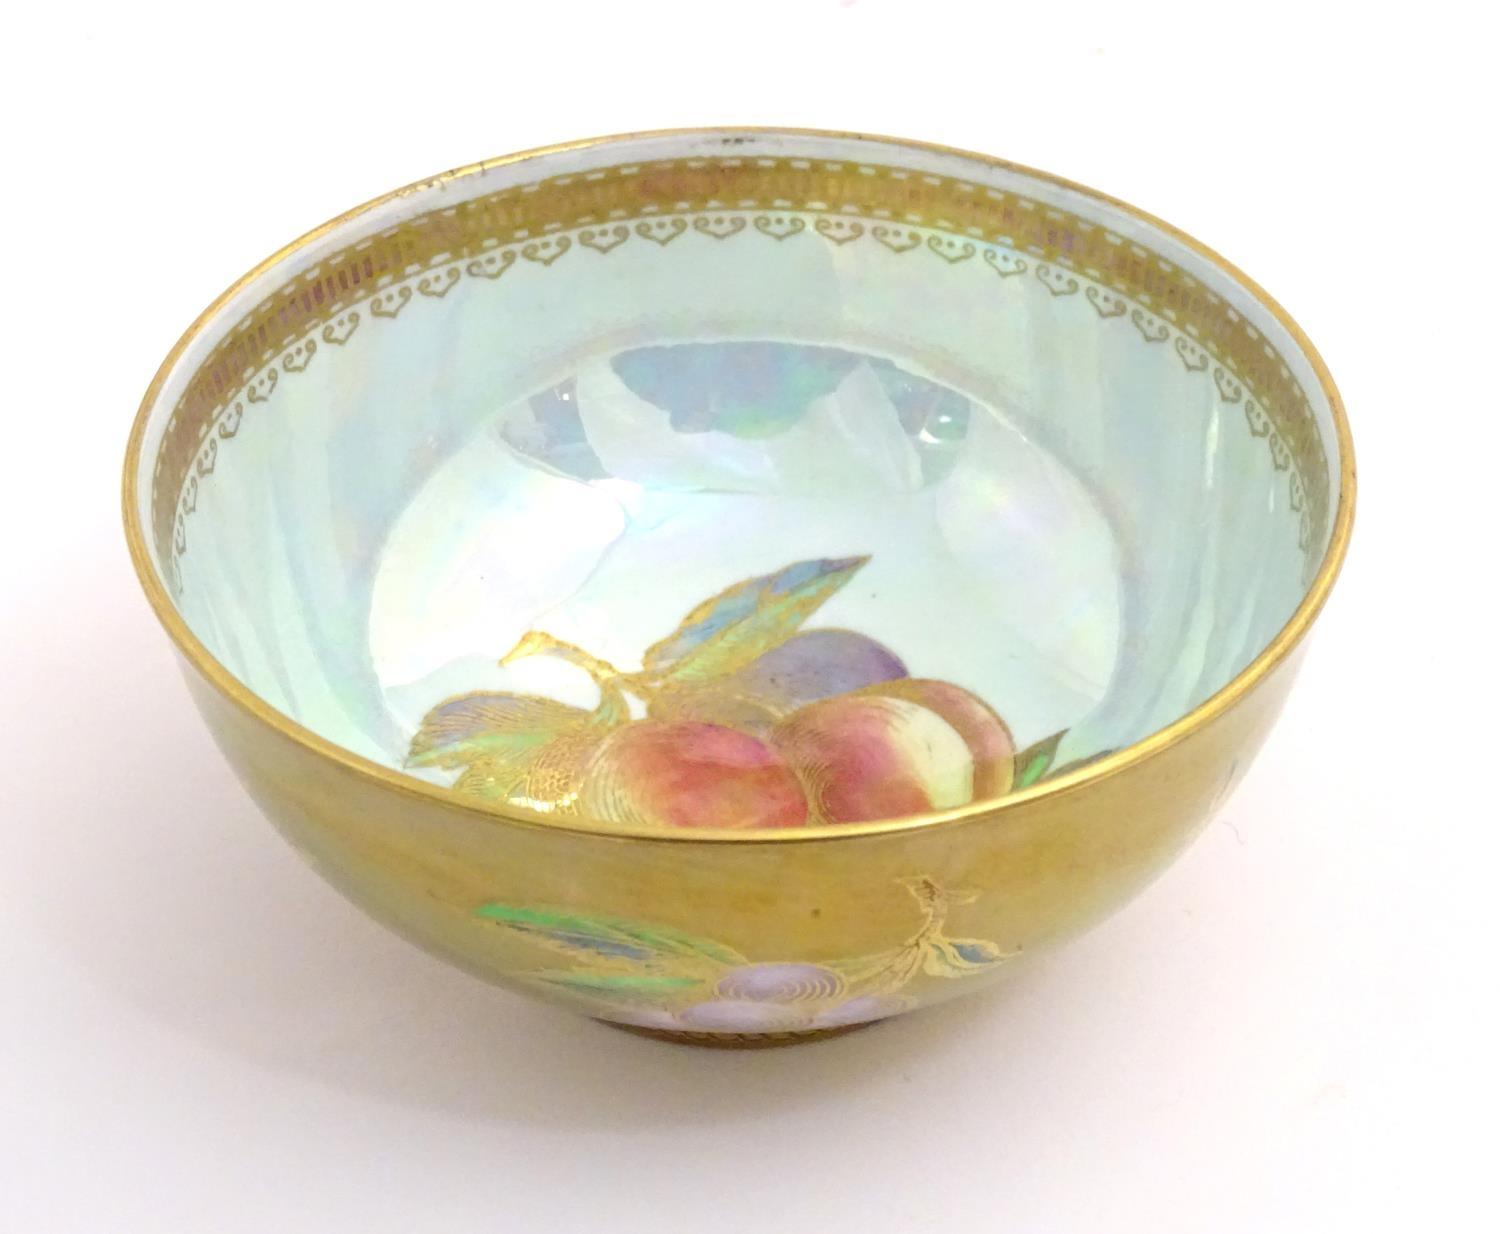 A Wedgwood lustre ware bowl with hand painted fruit decoration with gilt highlights. Approx. 2 1/